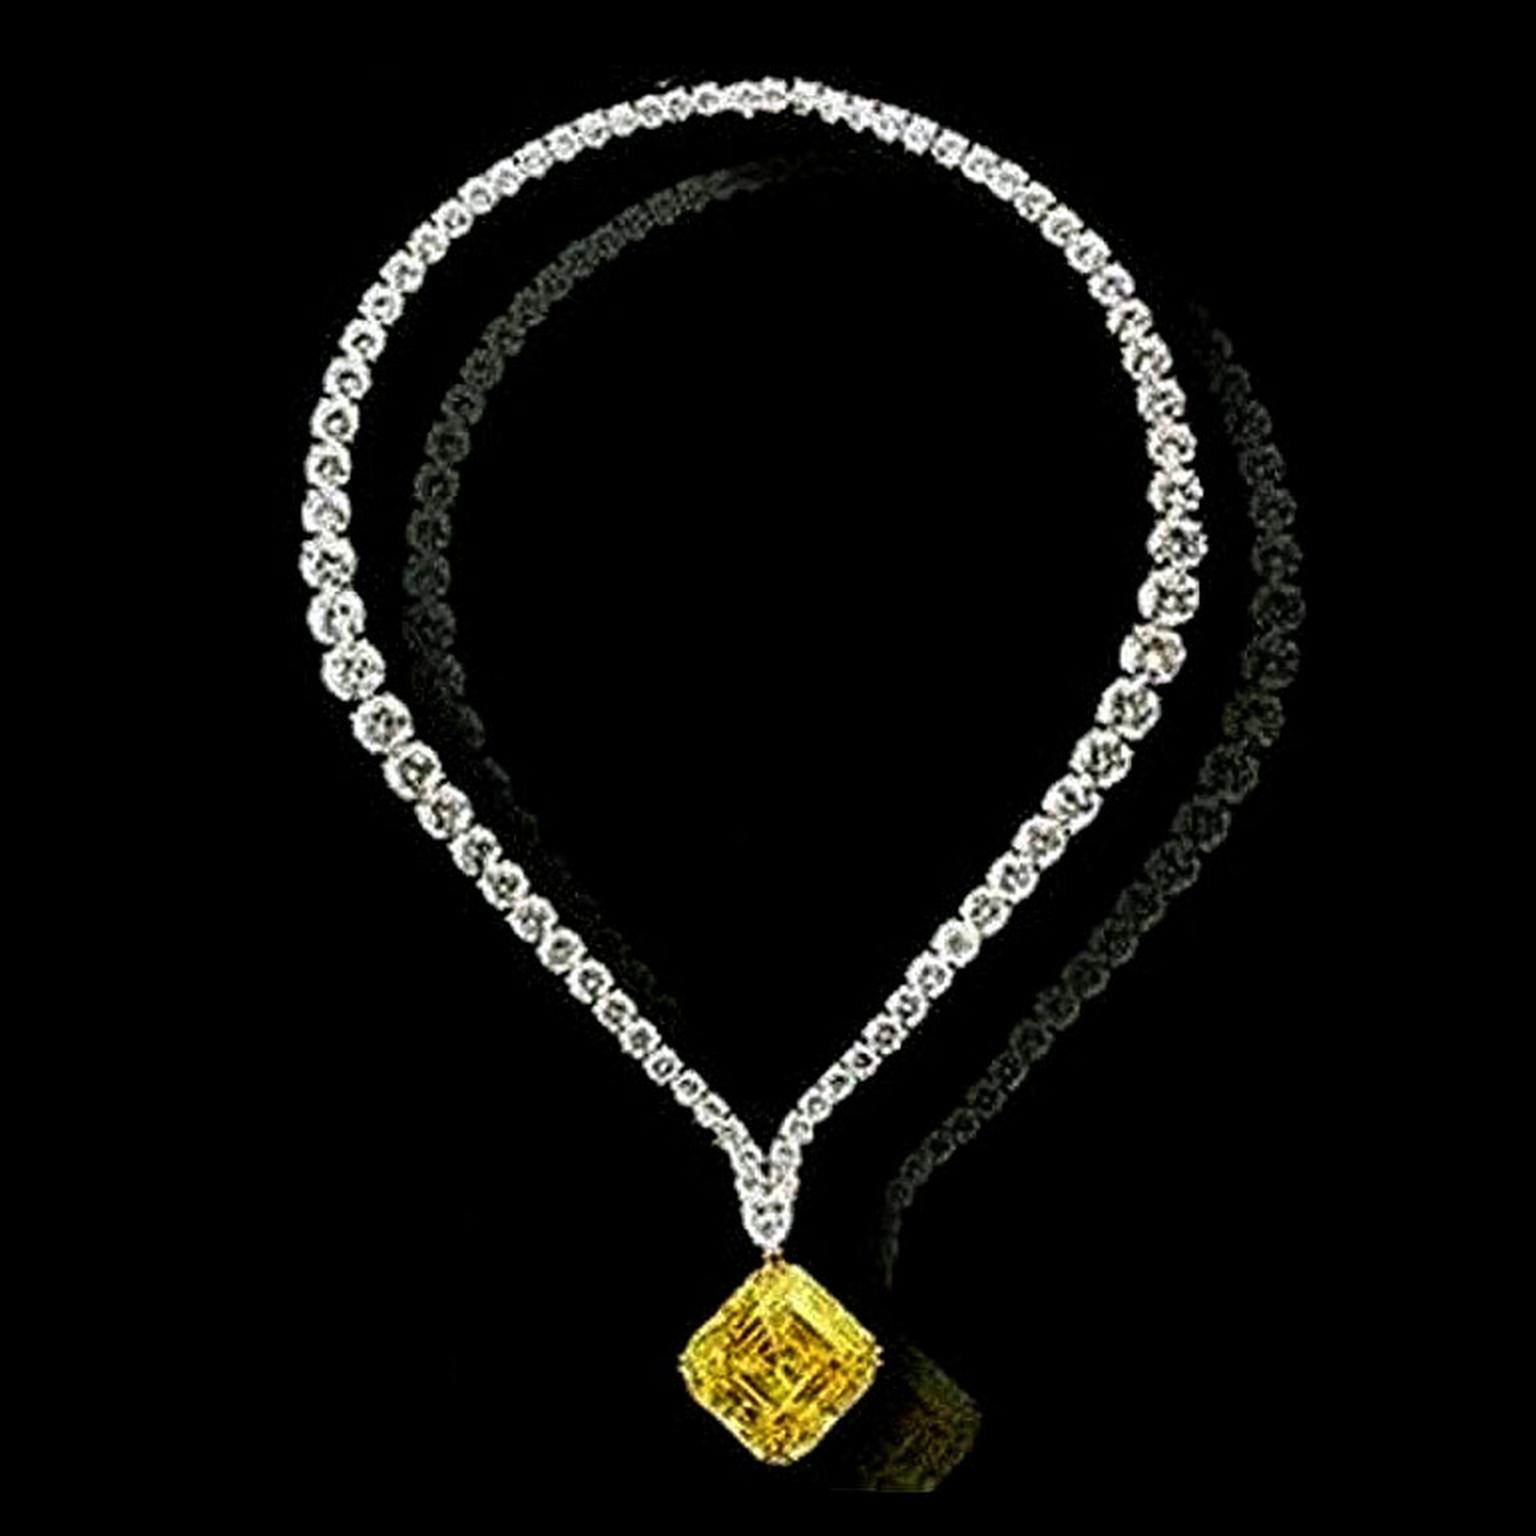 15.98 carat Natural Fancy Yellow Multi-Shape Diamond Necklace signed GRAFF  (GIA Certified, Yellow Gold) — Shreve, Crump & Low